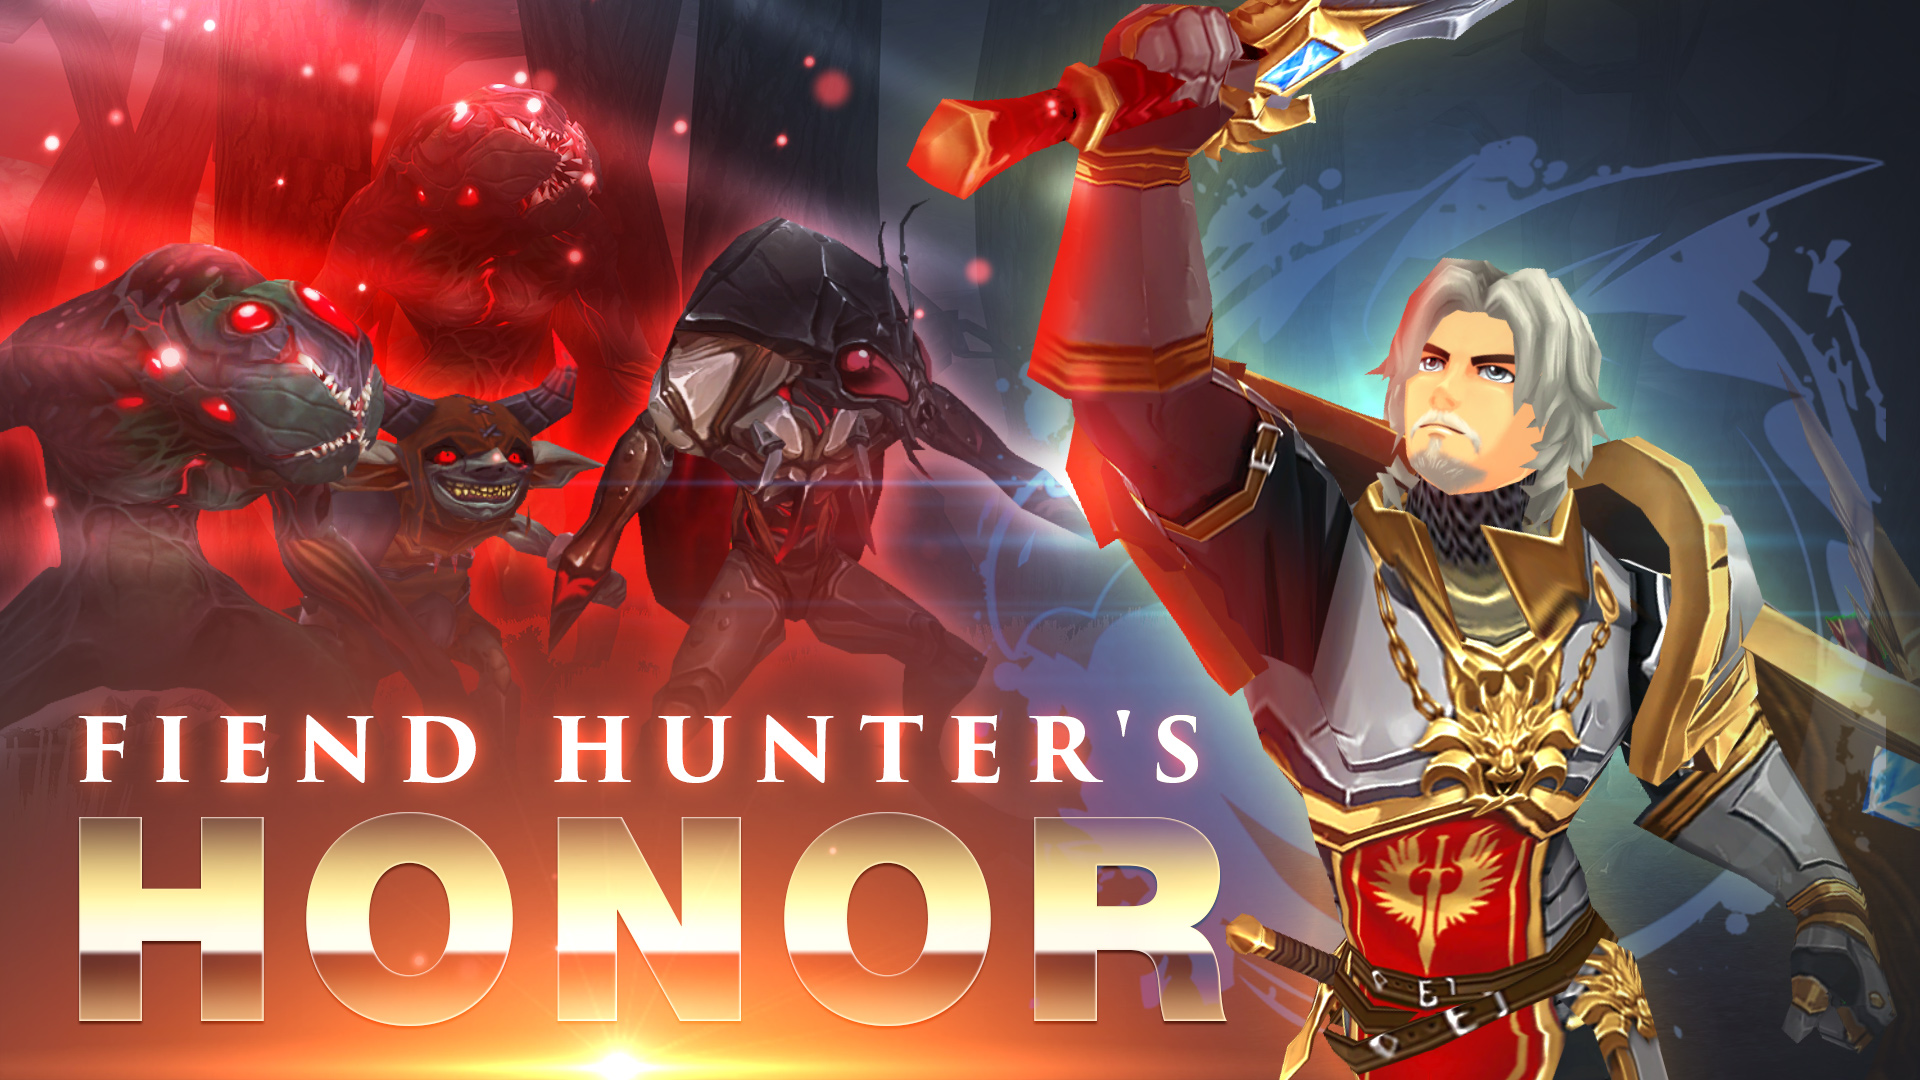 Fortune-Hunter Vested Outfit - AQ3D